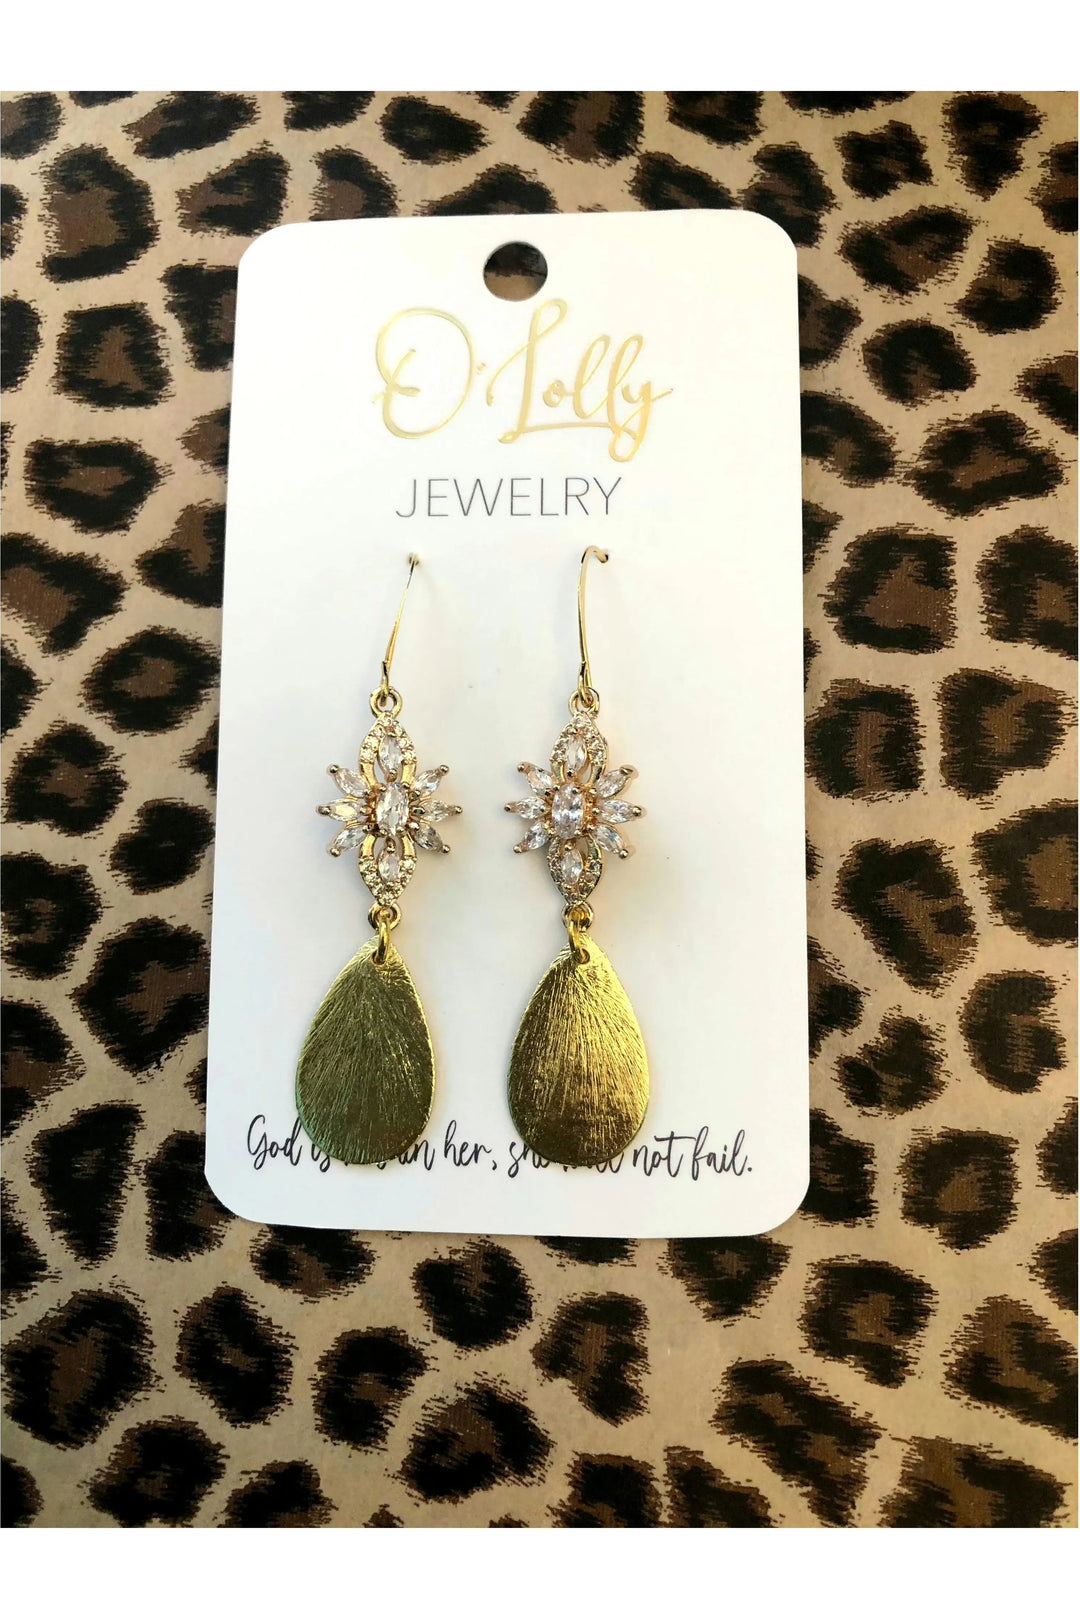 “Katherine” CZ Connector w/Gold Plated Teardrop Charm Earrings-Jewelry-O’Lolly-Vintage Dragonfly-Women’s Fashion Boutique Located in Sumrall, Mississippi